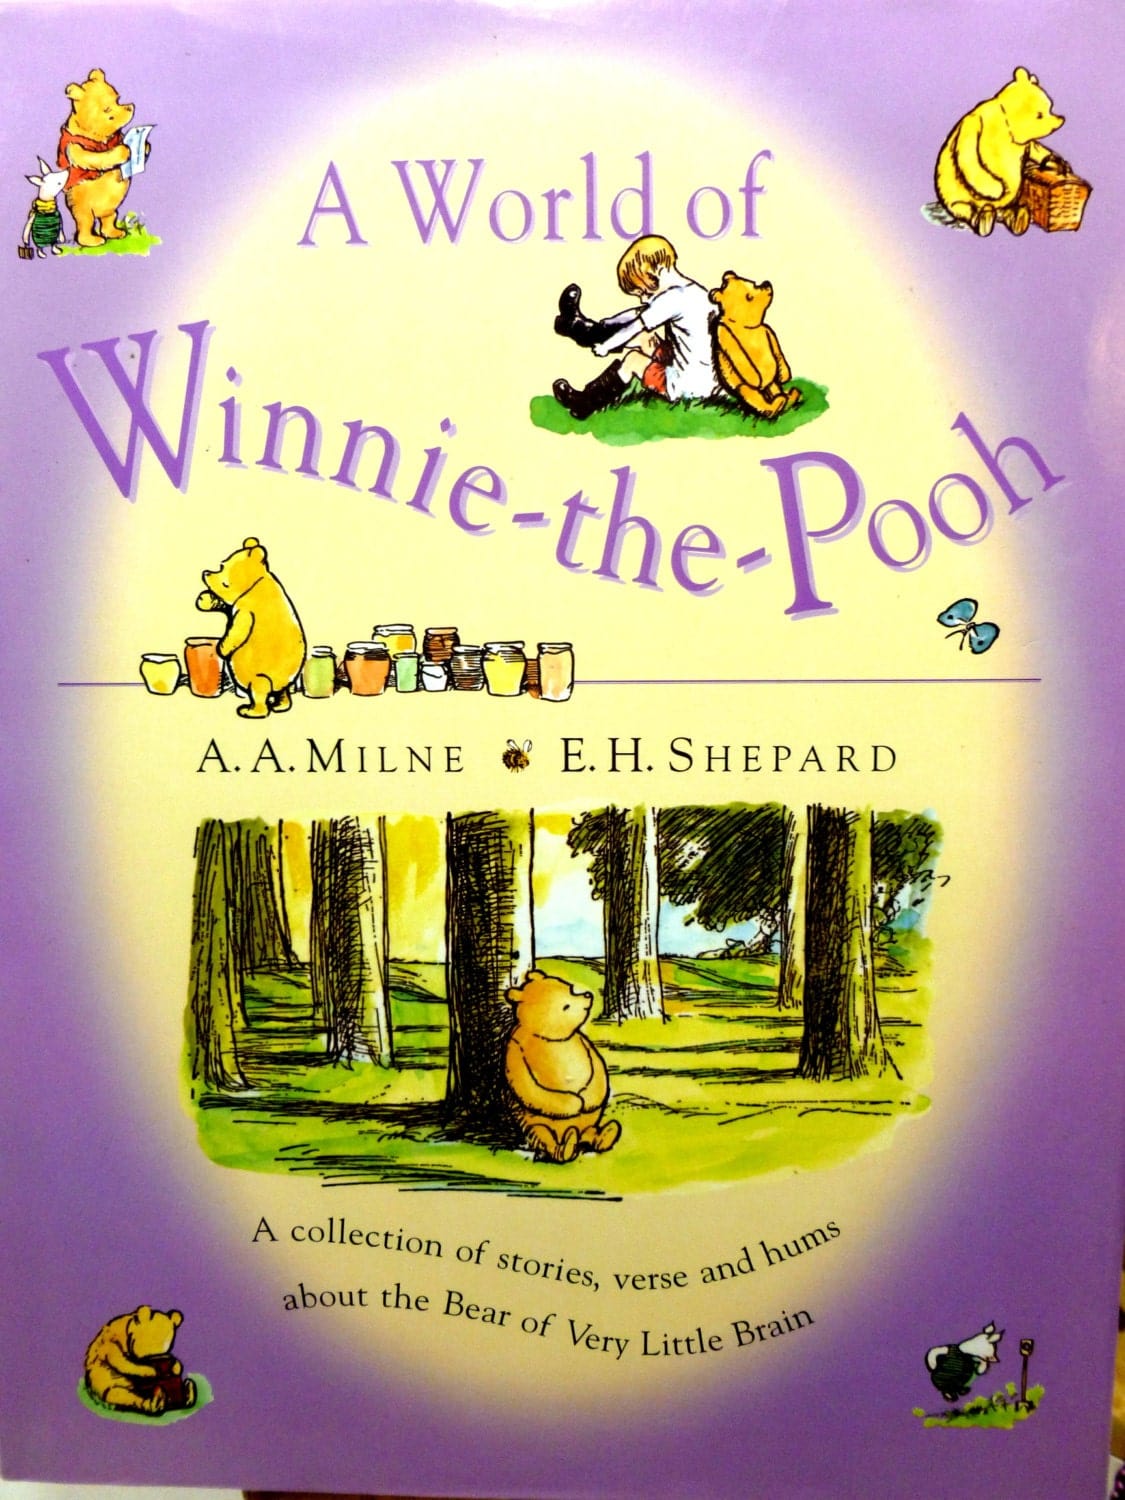 Front cover of A World of Winnie the Pooh Vintage Hardback Childrens Book illustrated with images of Christopher Robin and Pooh against a lilac ground. 